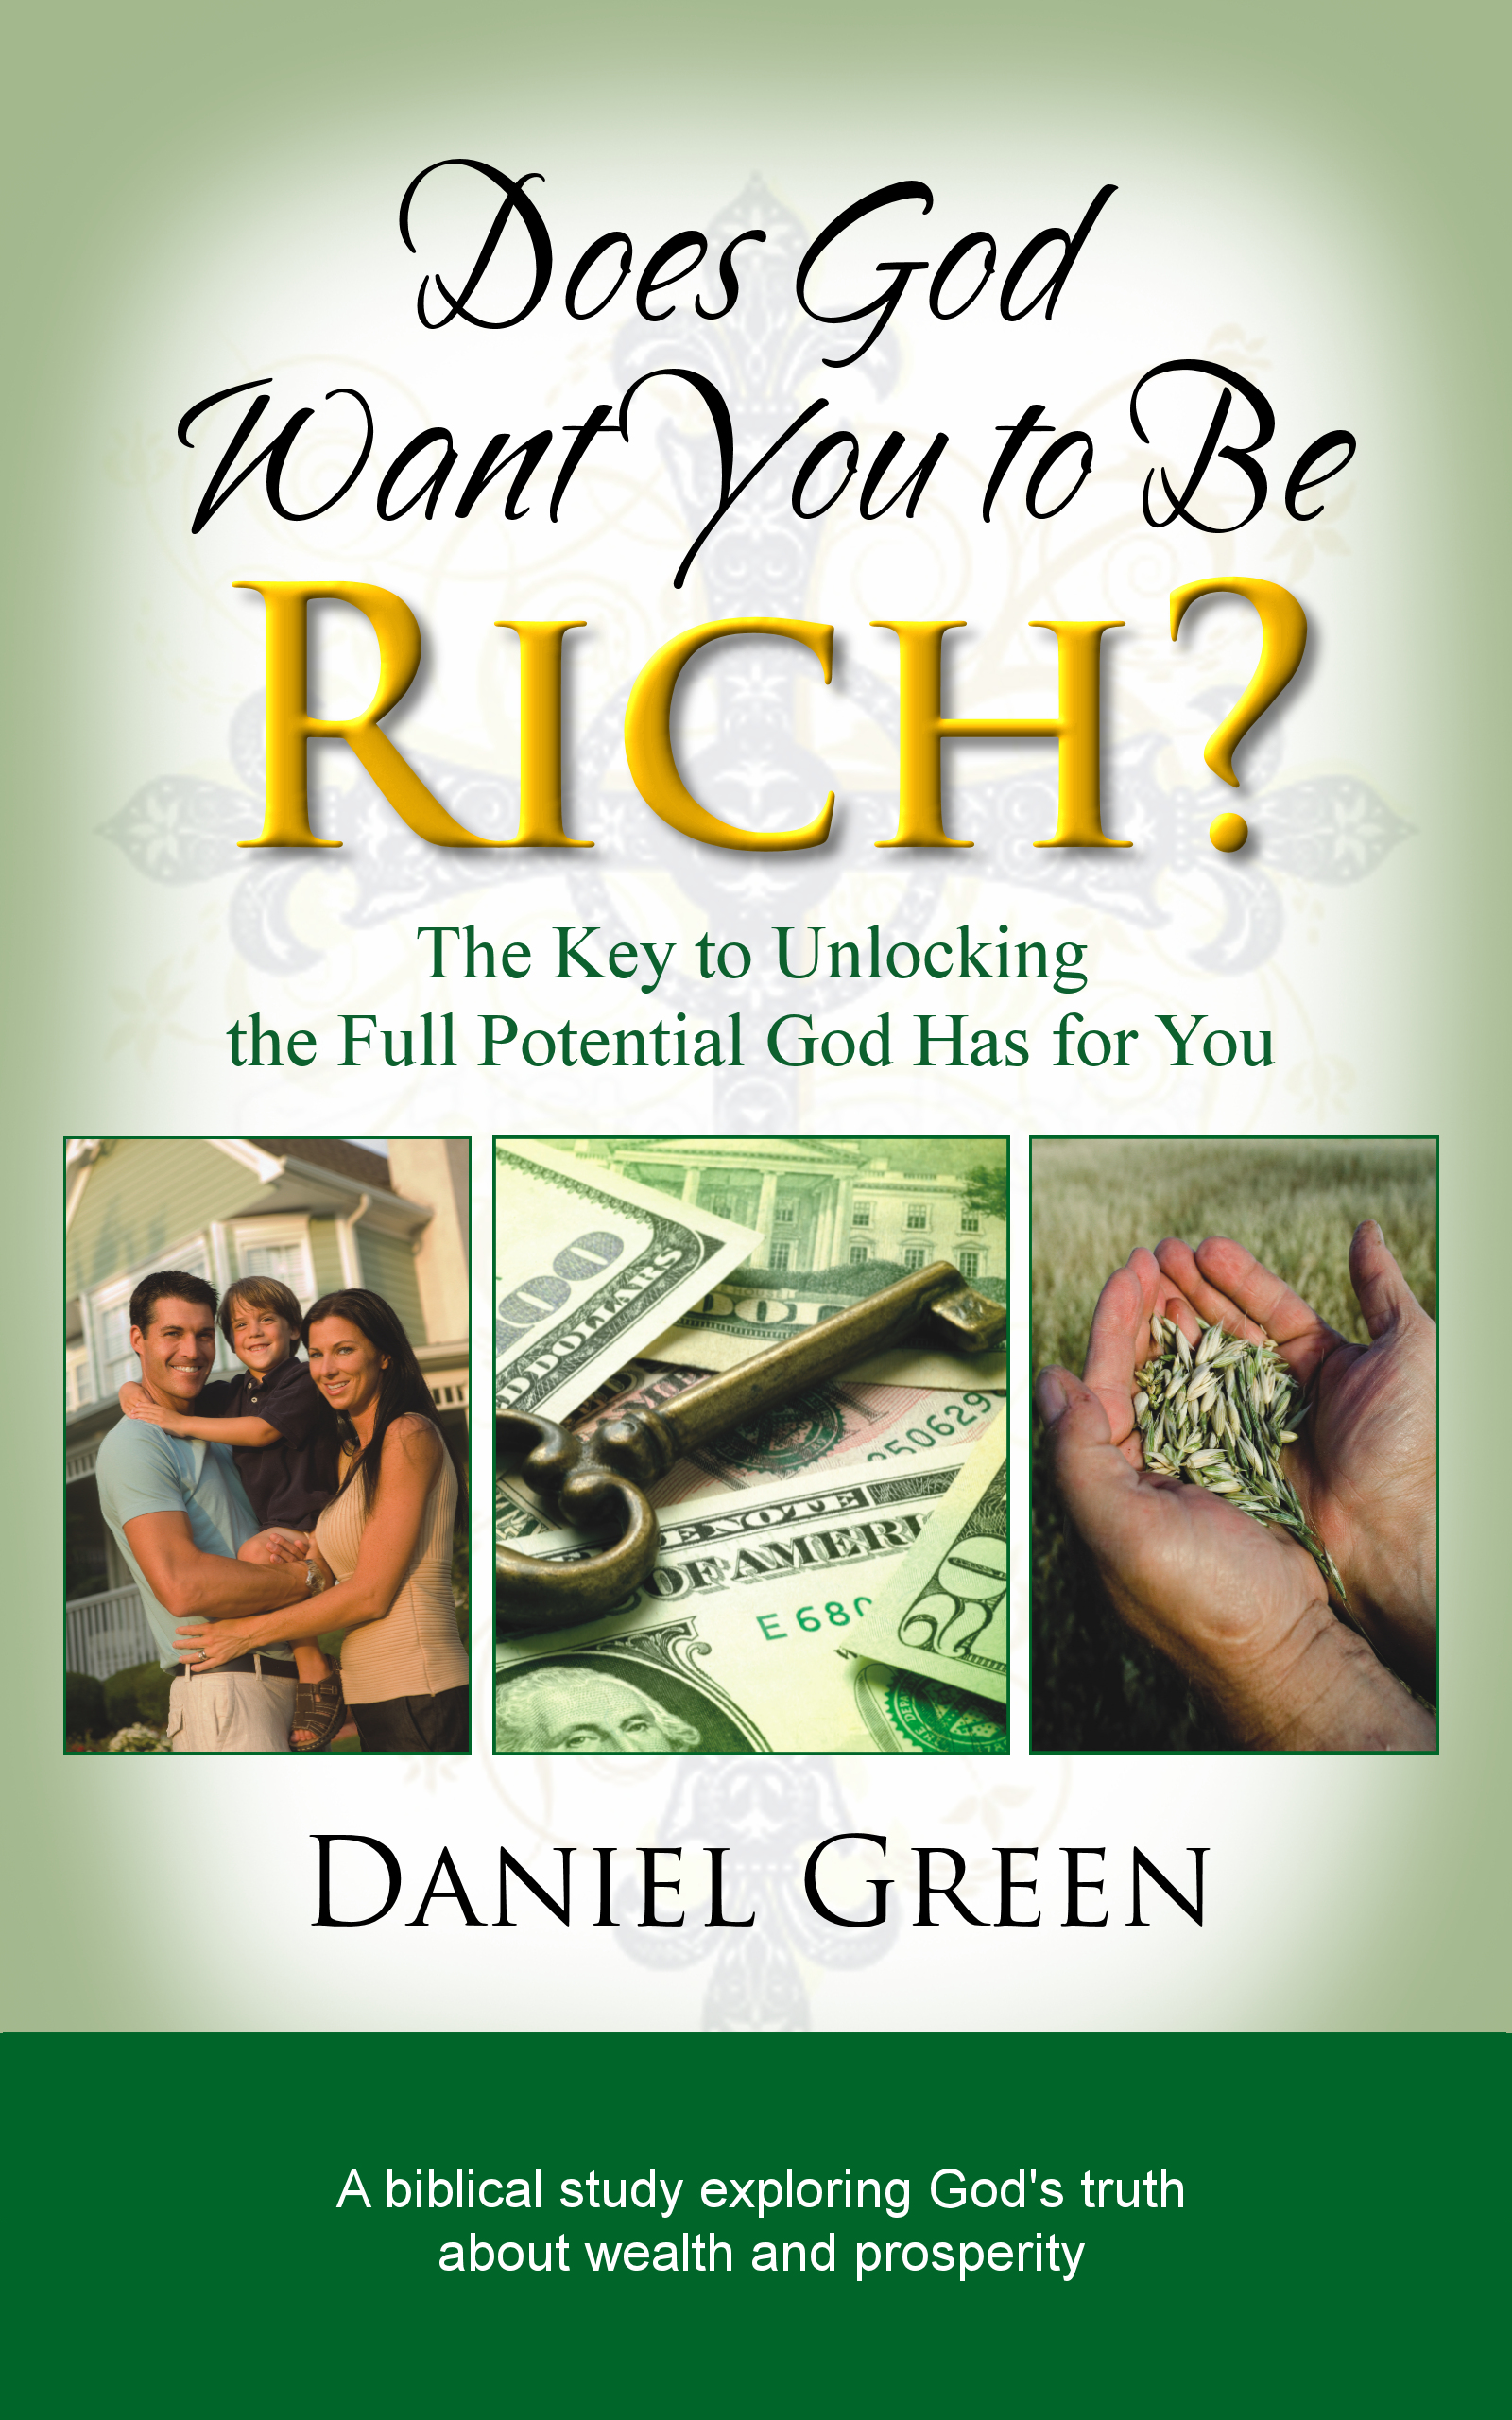 FREE: Does God Want You to Be Rich? by Daniel Green